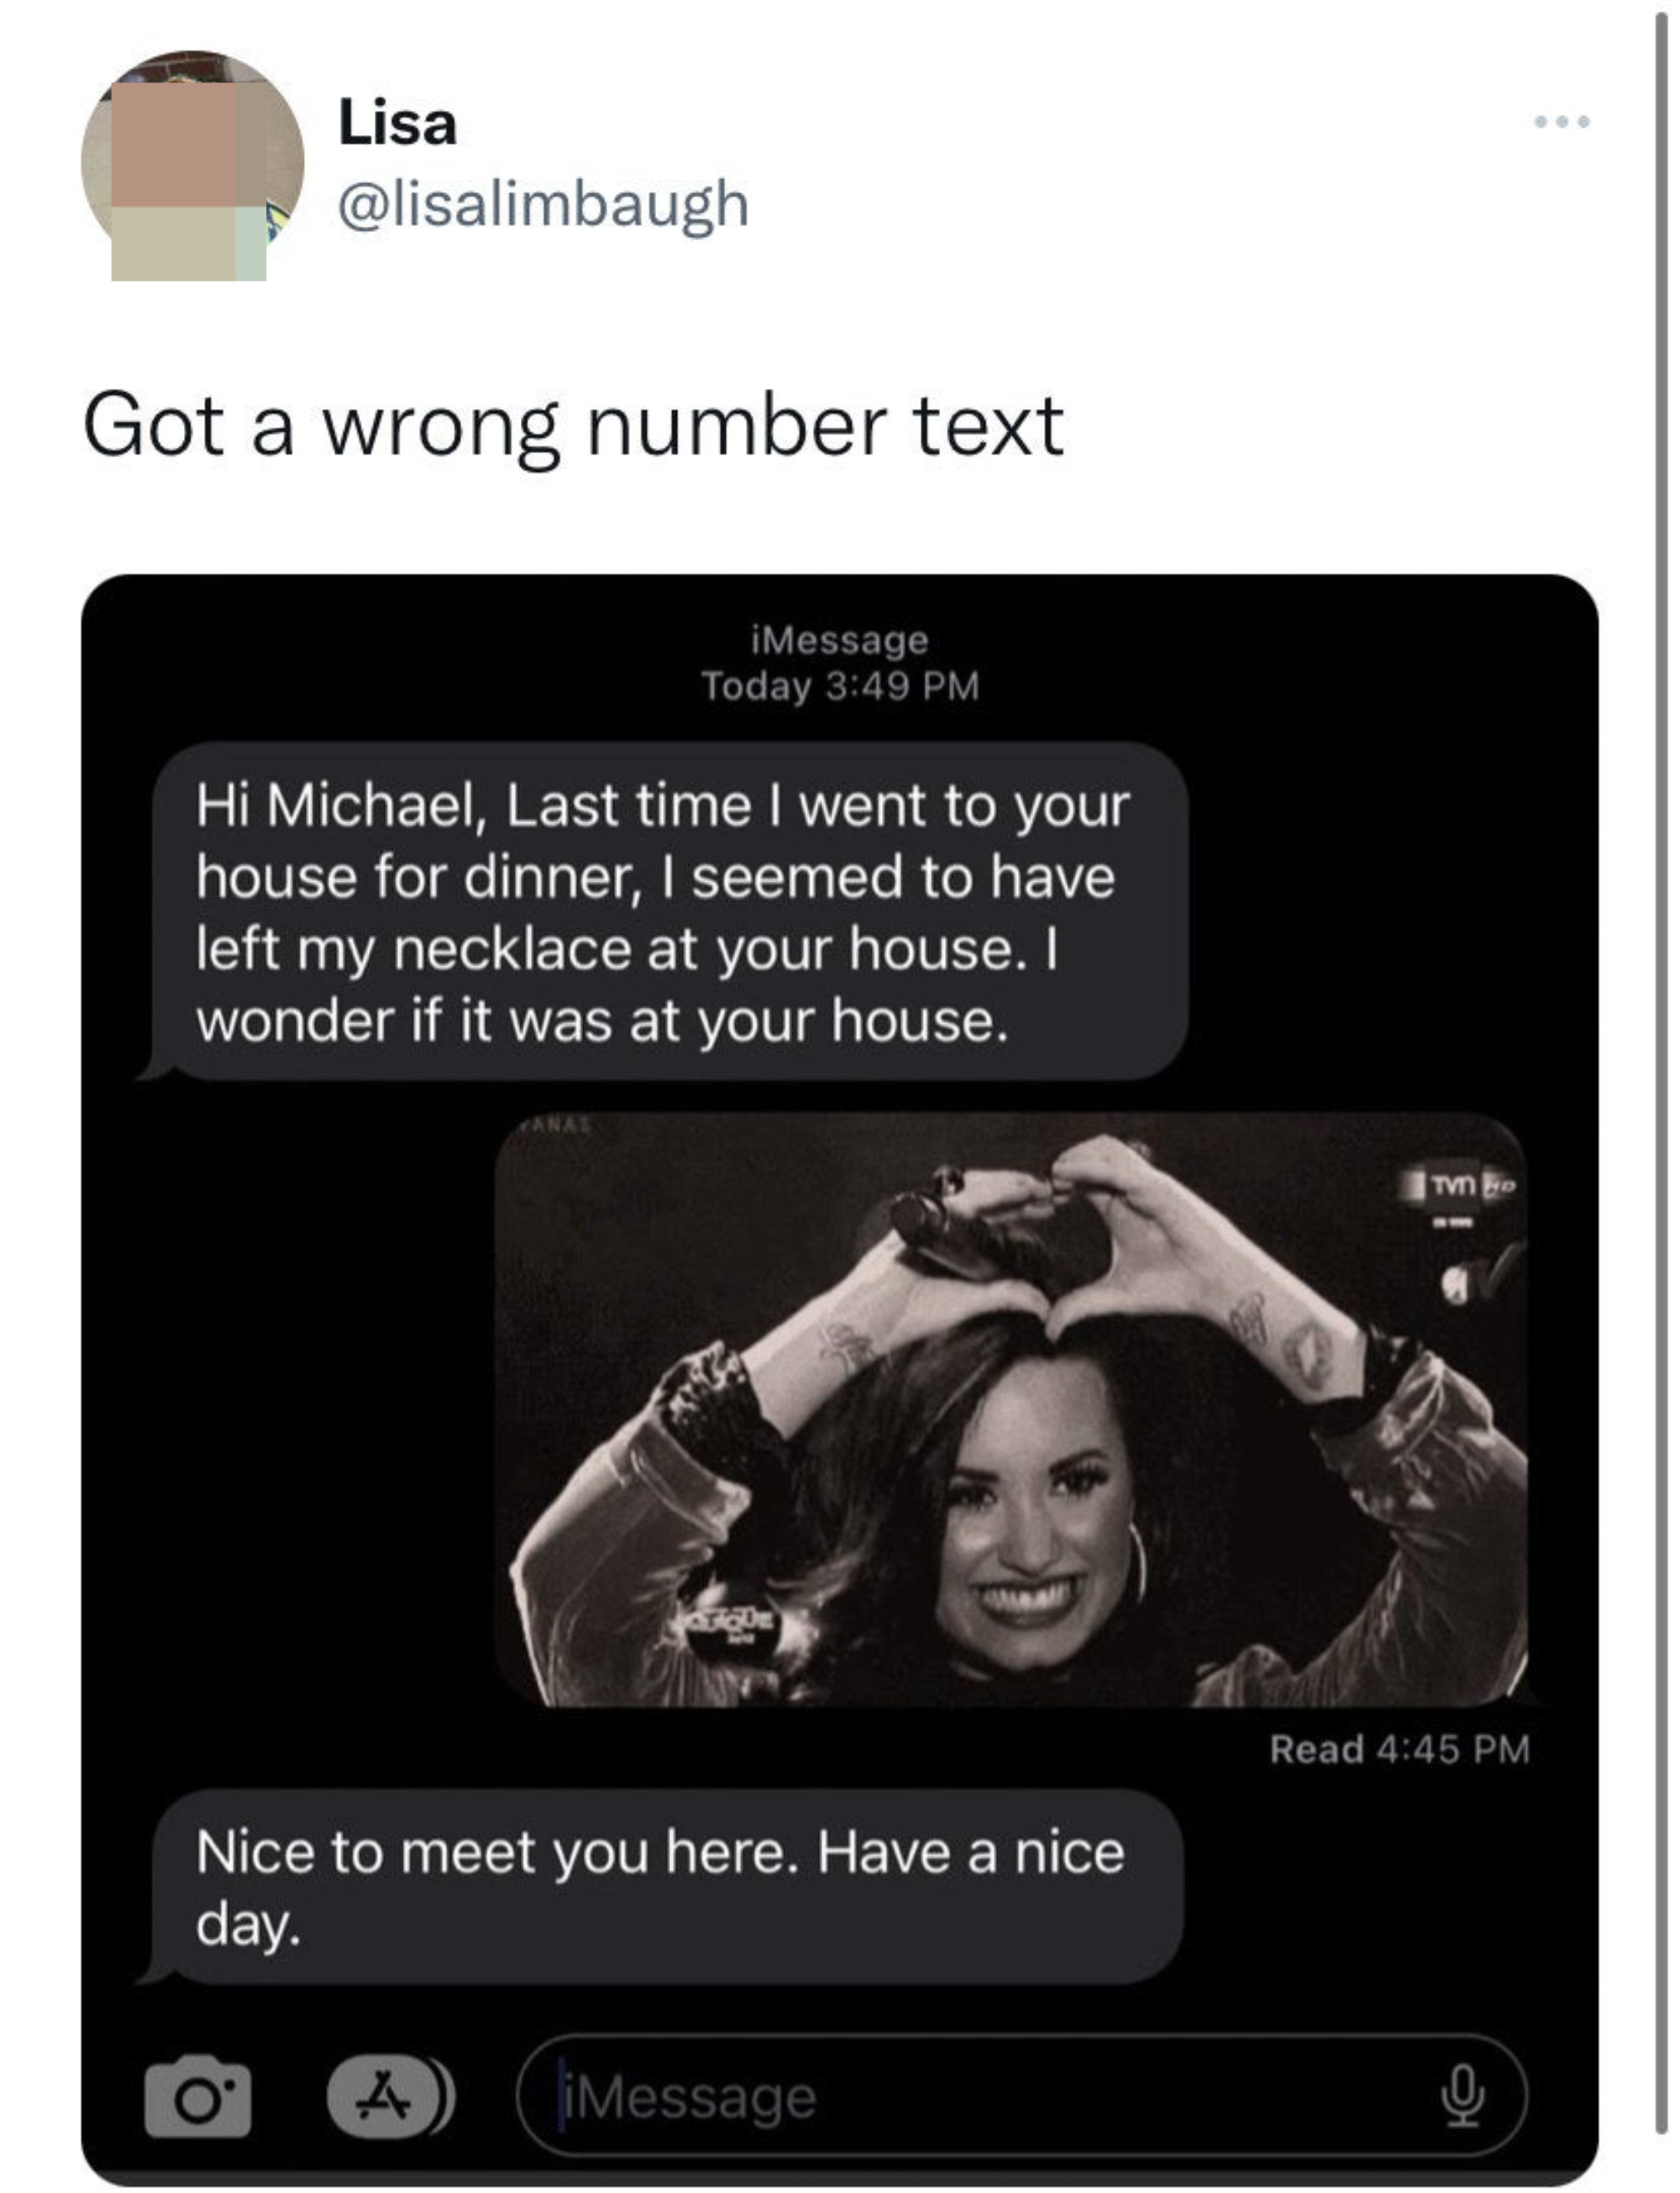 Wrong number text asks about necklace left at their house and gets a photo of Demi Lovato smiling, and they respond with &quot;Nice to meet you, have a nice day&quot;